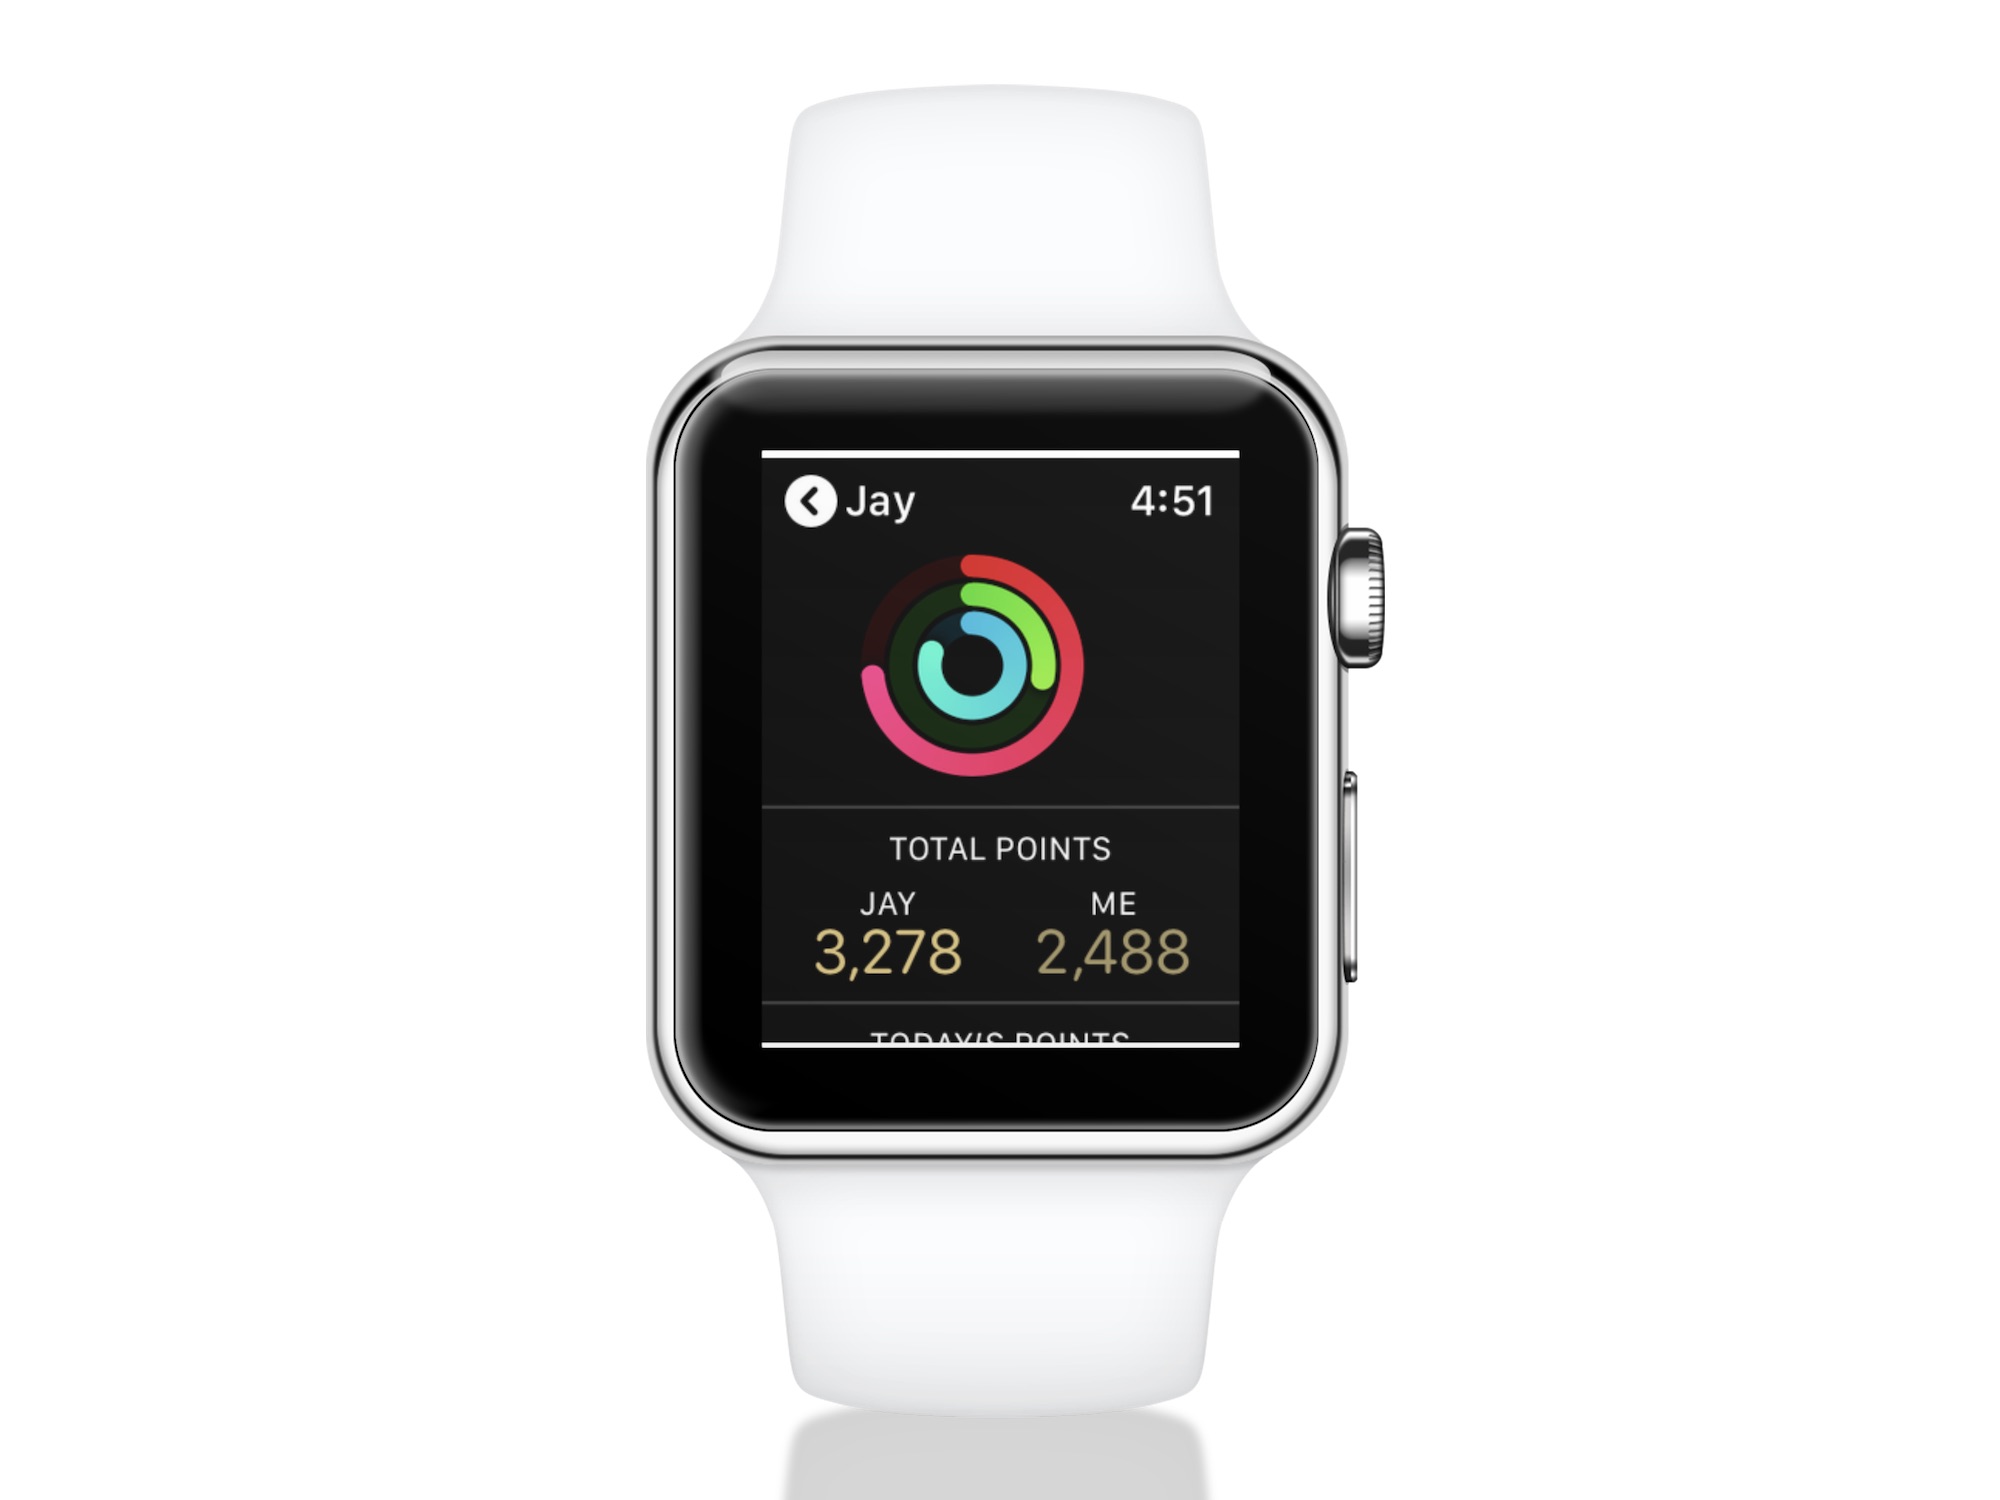 Apple Watch activity competitions